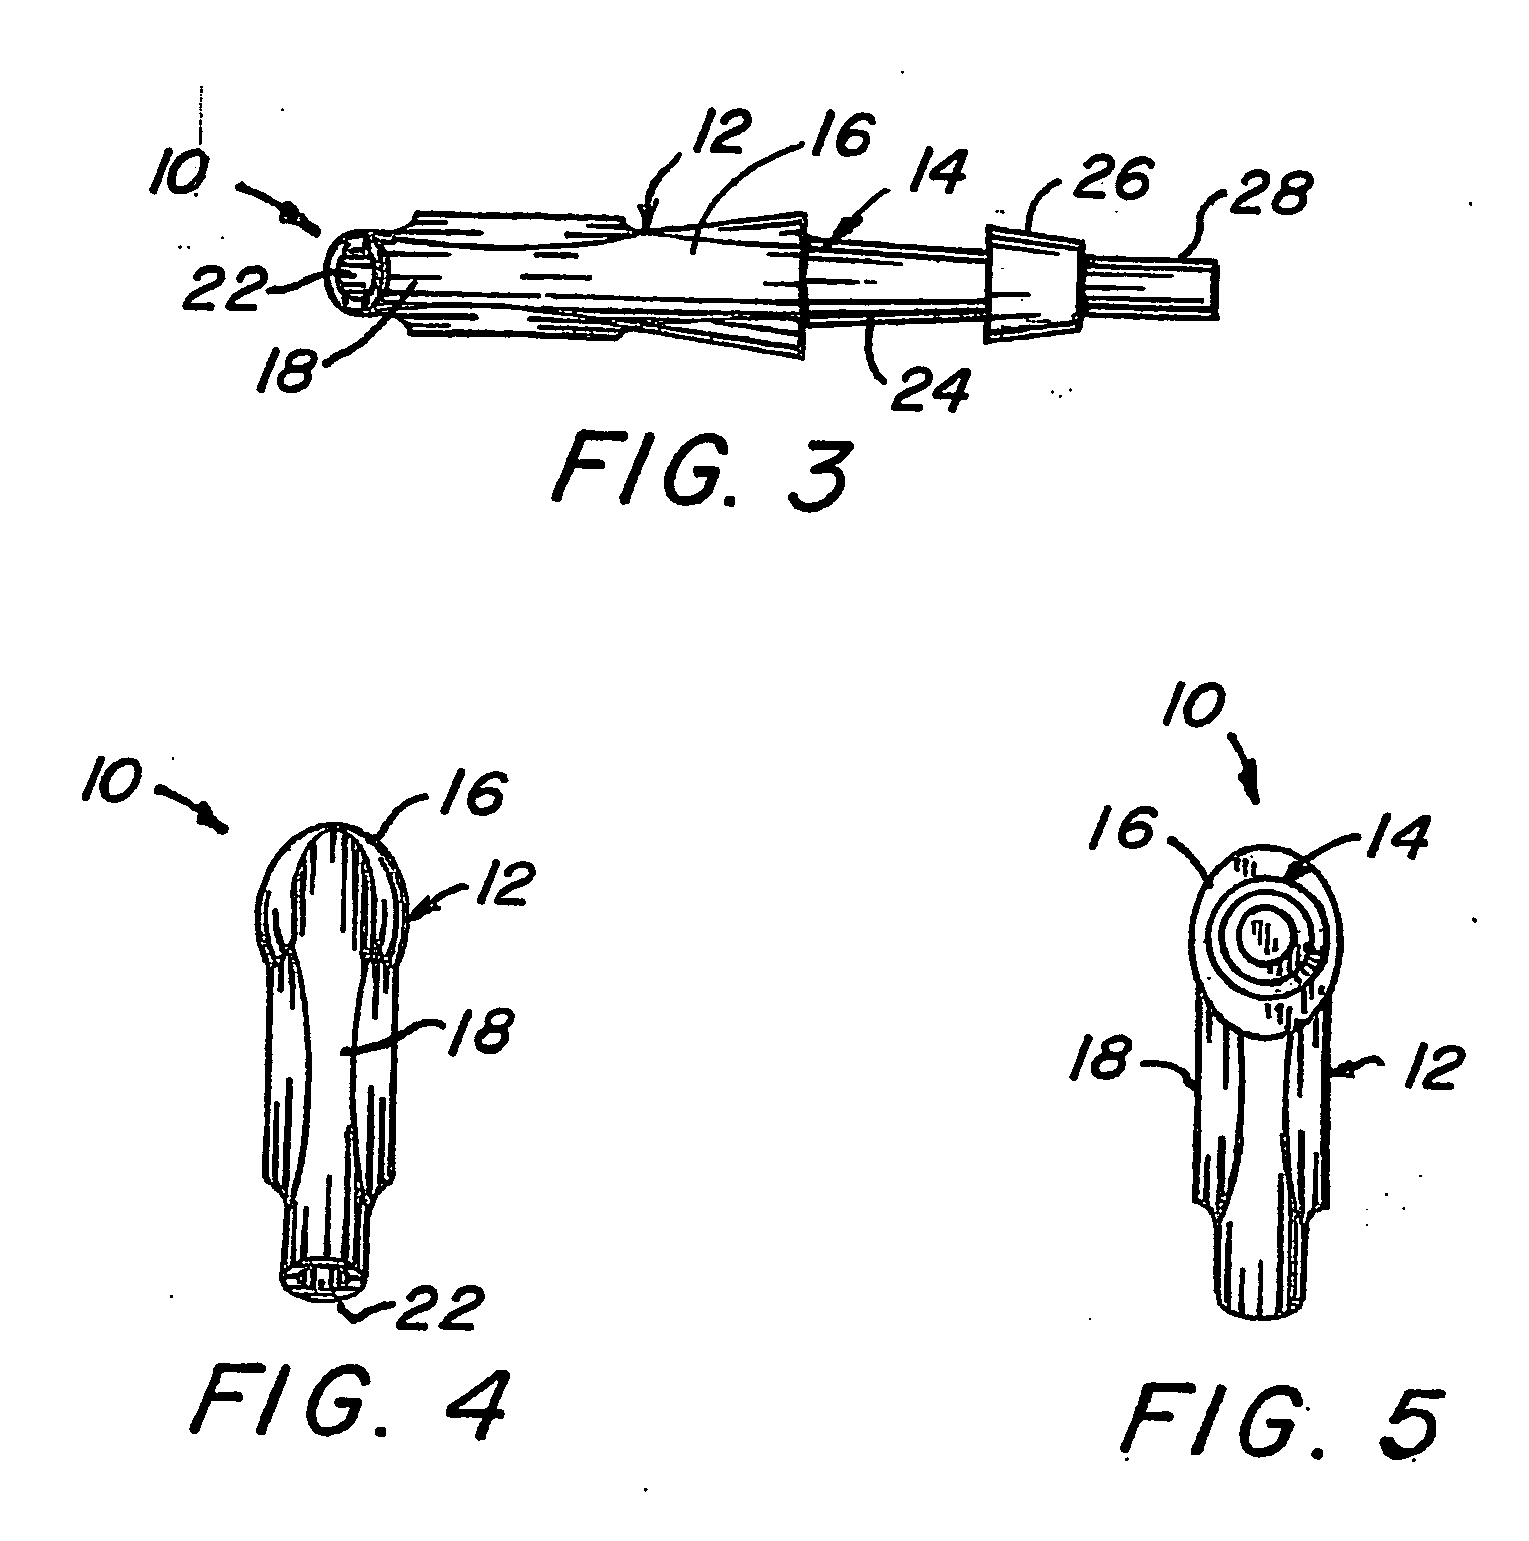 Earplug with articulating stem and locking features